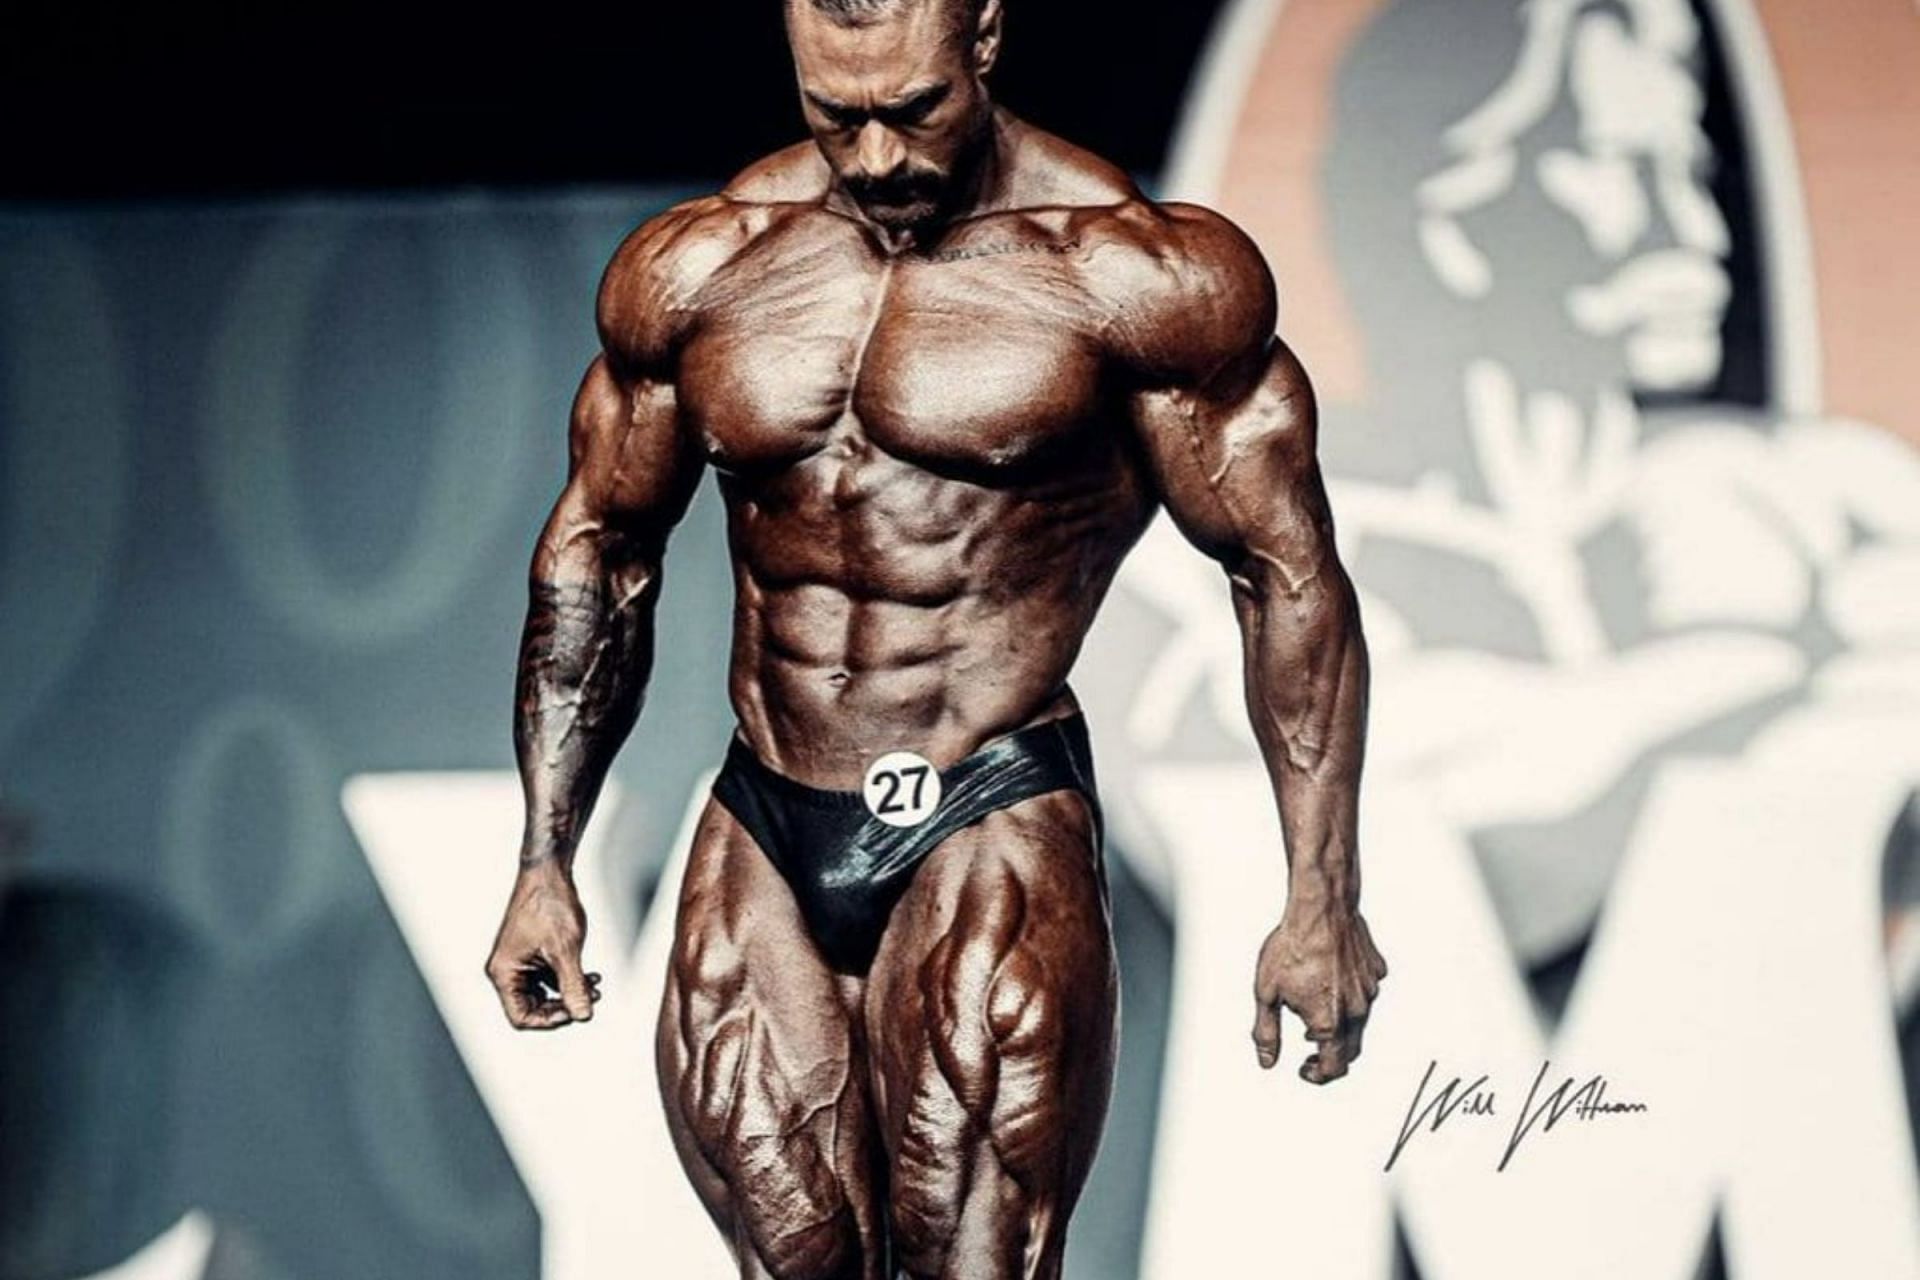 “Imagine pulling out of the Classic Physique” Chris Bumstead teases